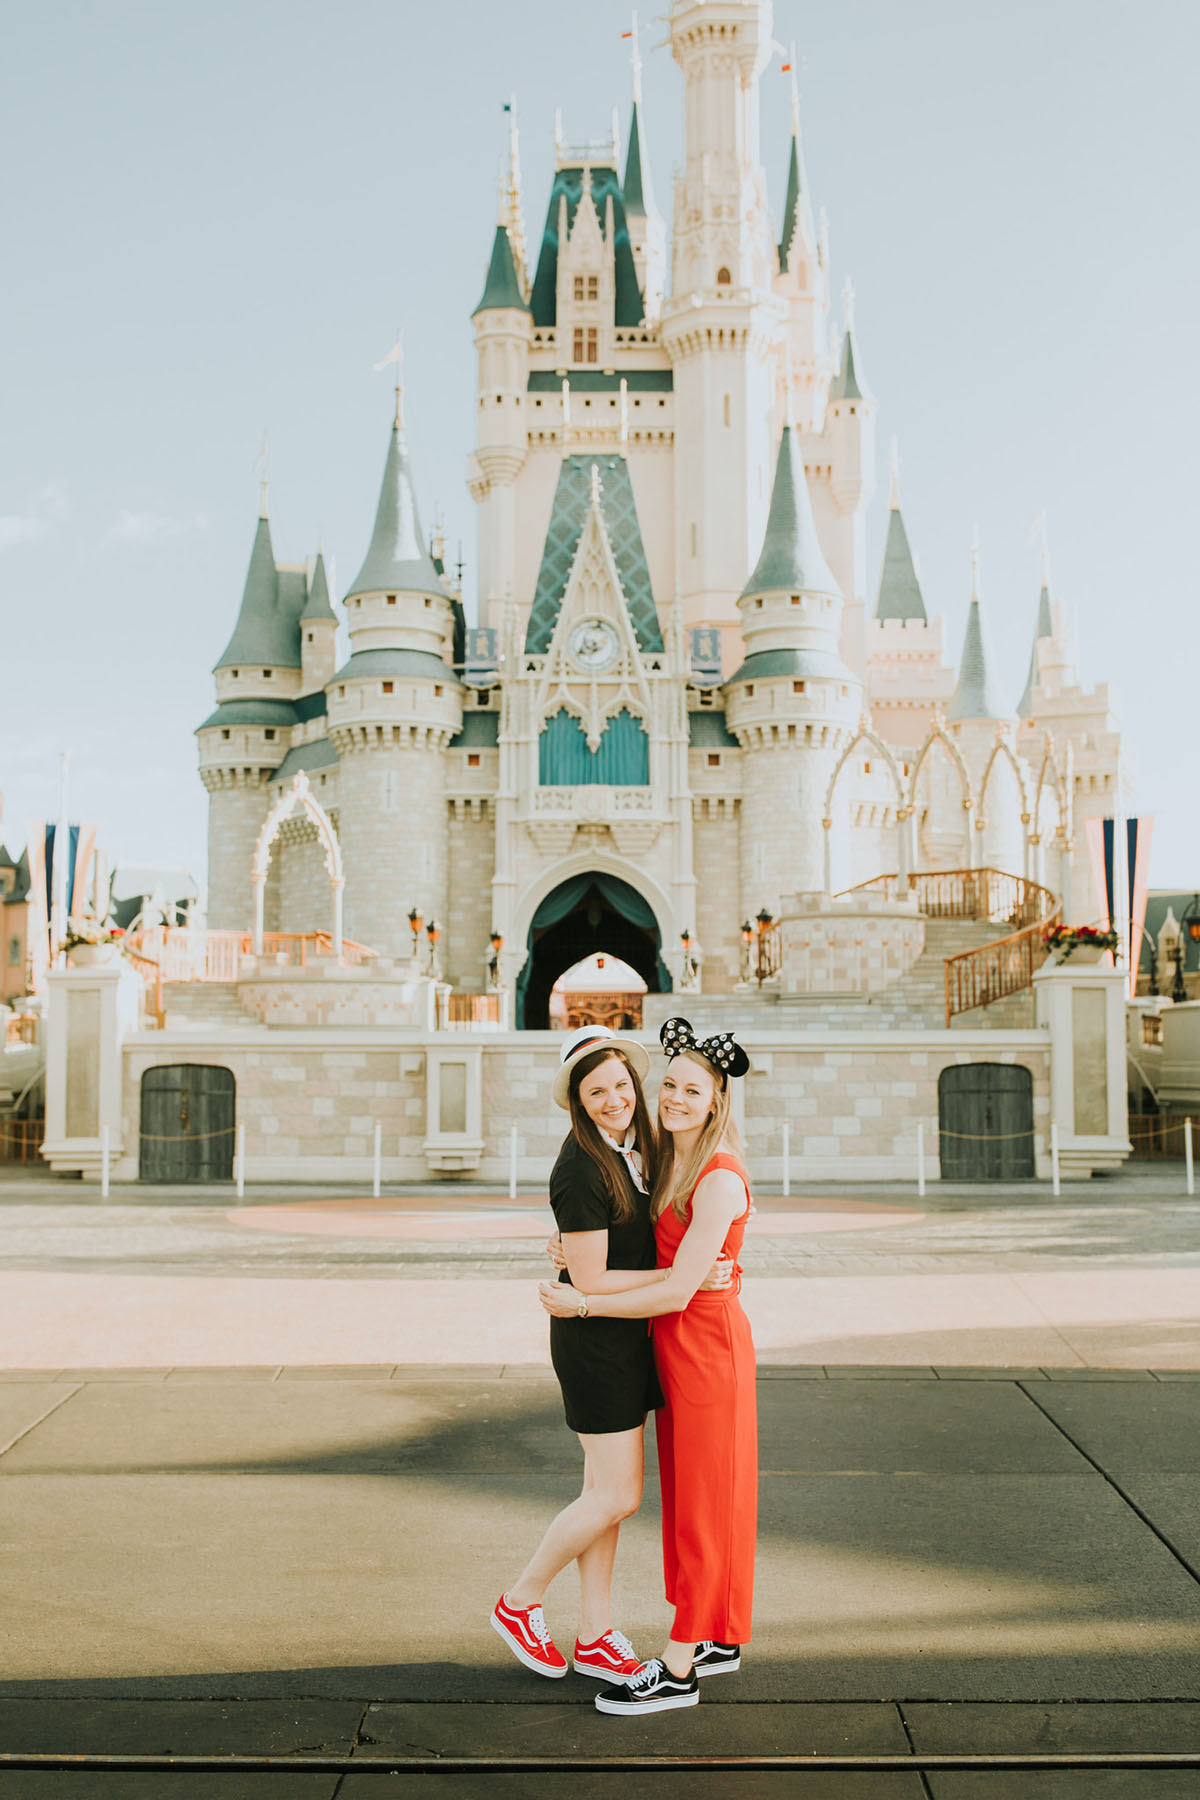 Fun, colorful engagement photos at Walt Disney World colorful red mouse ears coordinated outfits two brides same-sex lesbian engagement cinerella castle